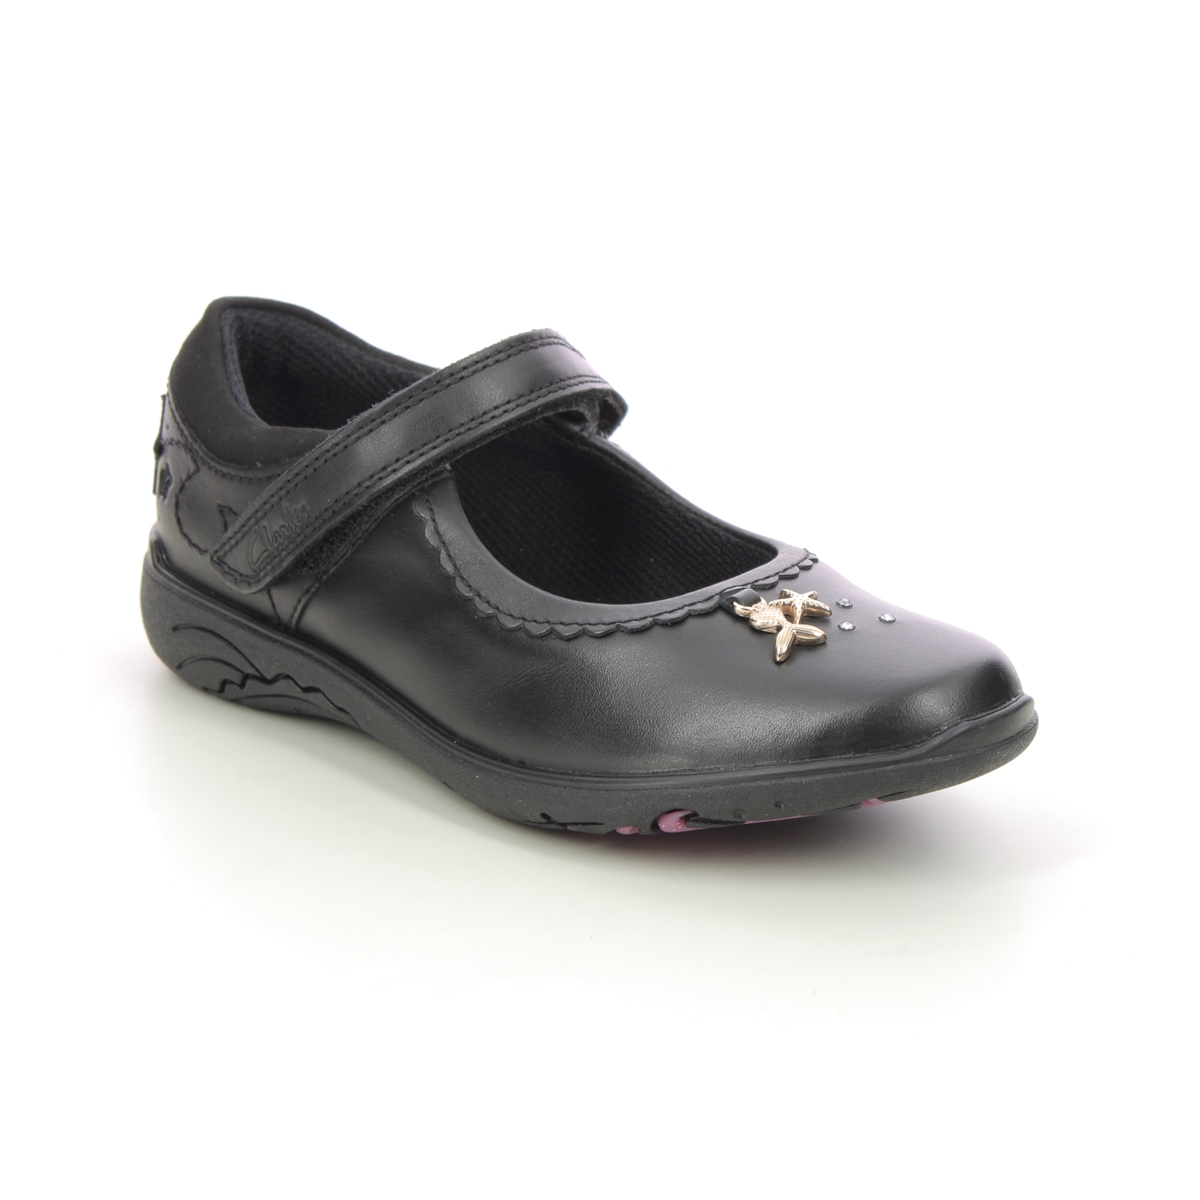 Clarks Relda Sea K Mary Jane Black Leather Kids Girls School Shoes 722405E In Size 1 In Plain Black Leather E Width Fitting Narrow Fit For School For